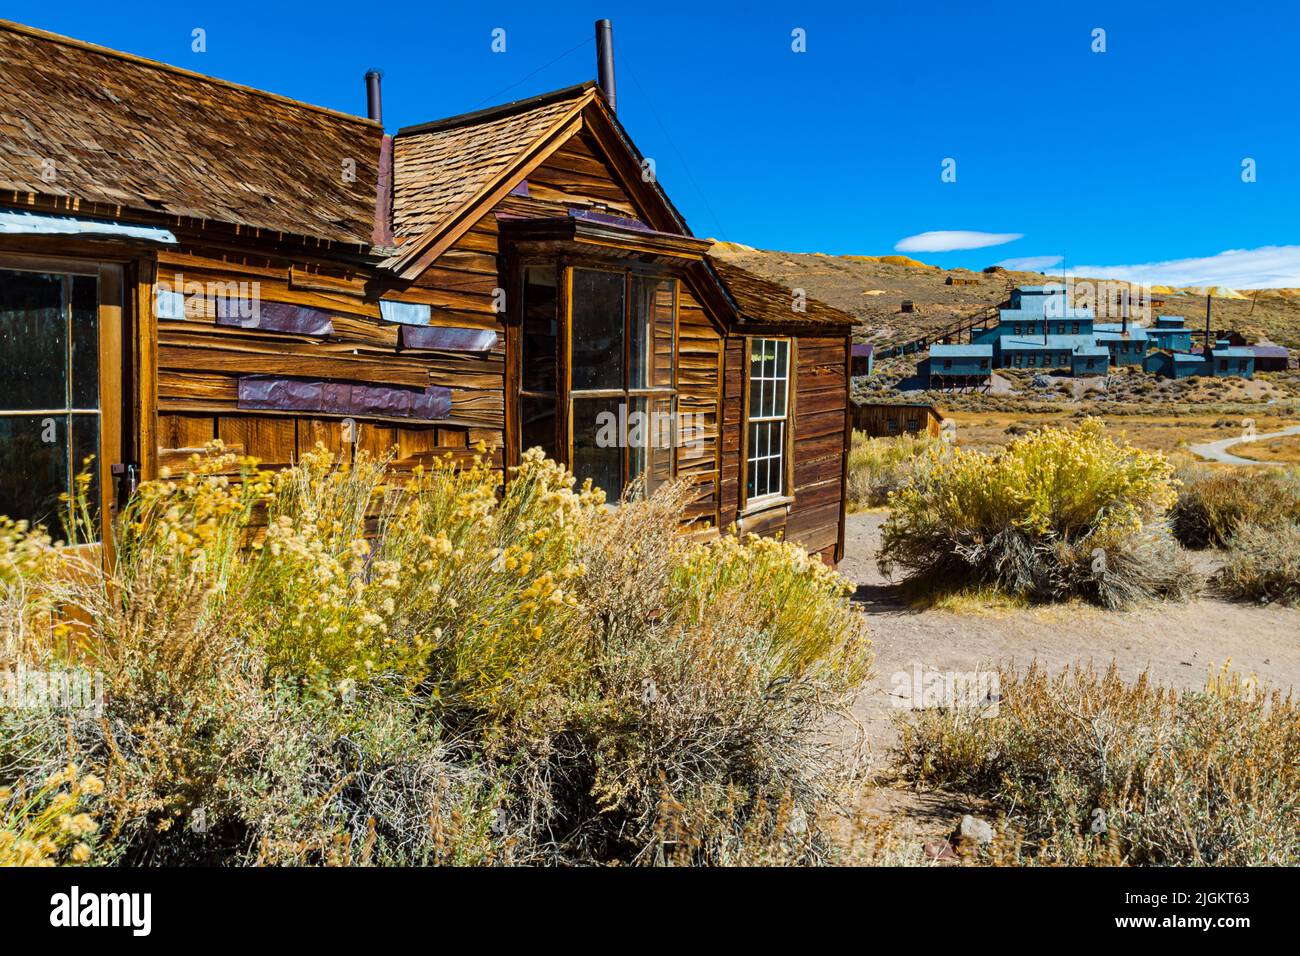 The Kirkwood House With The Standard Consolidated Mine in The Distance, Bodie State Historical Park, California, USA Stock Photo